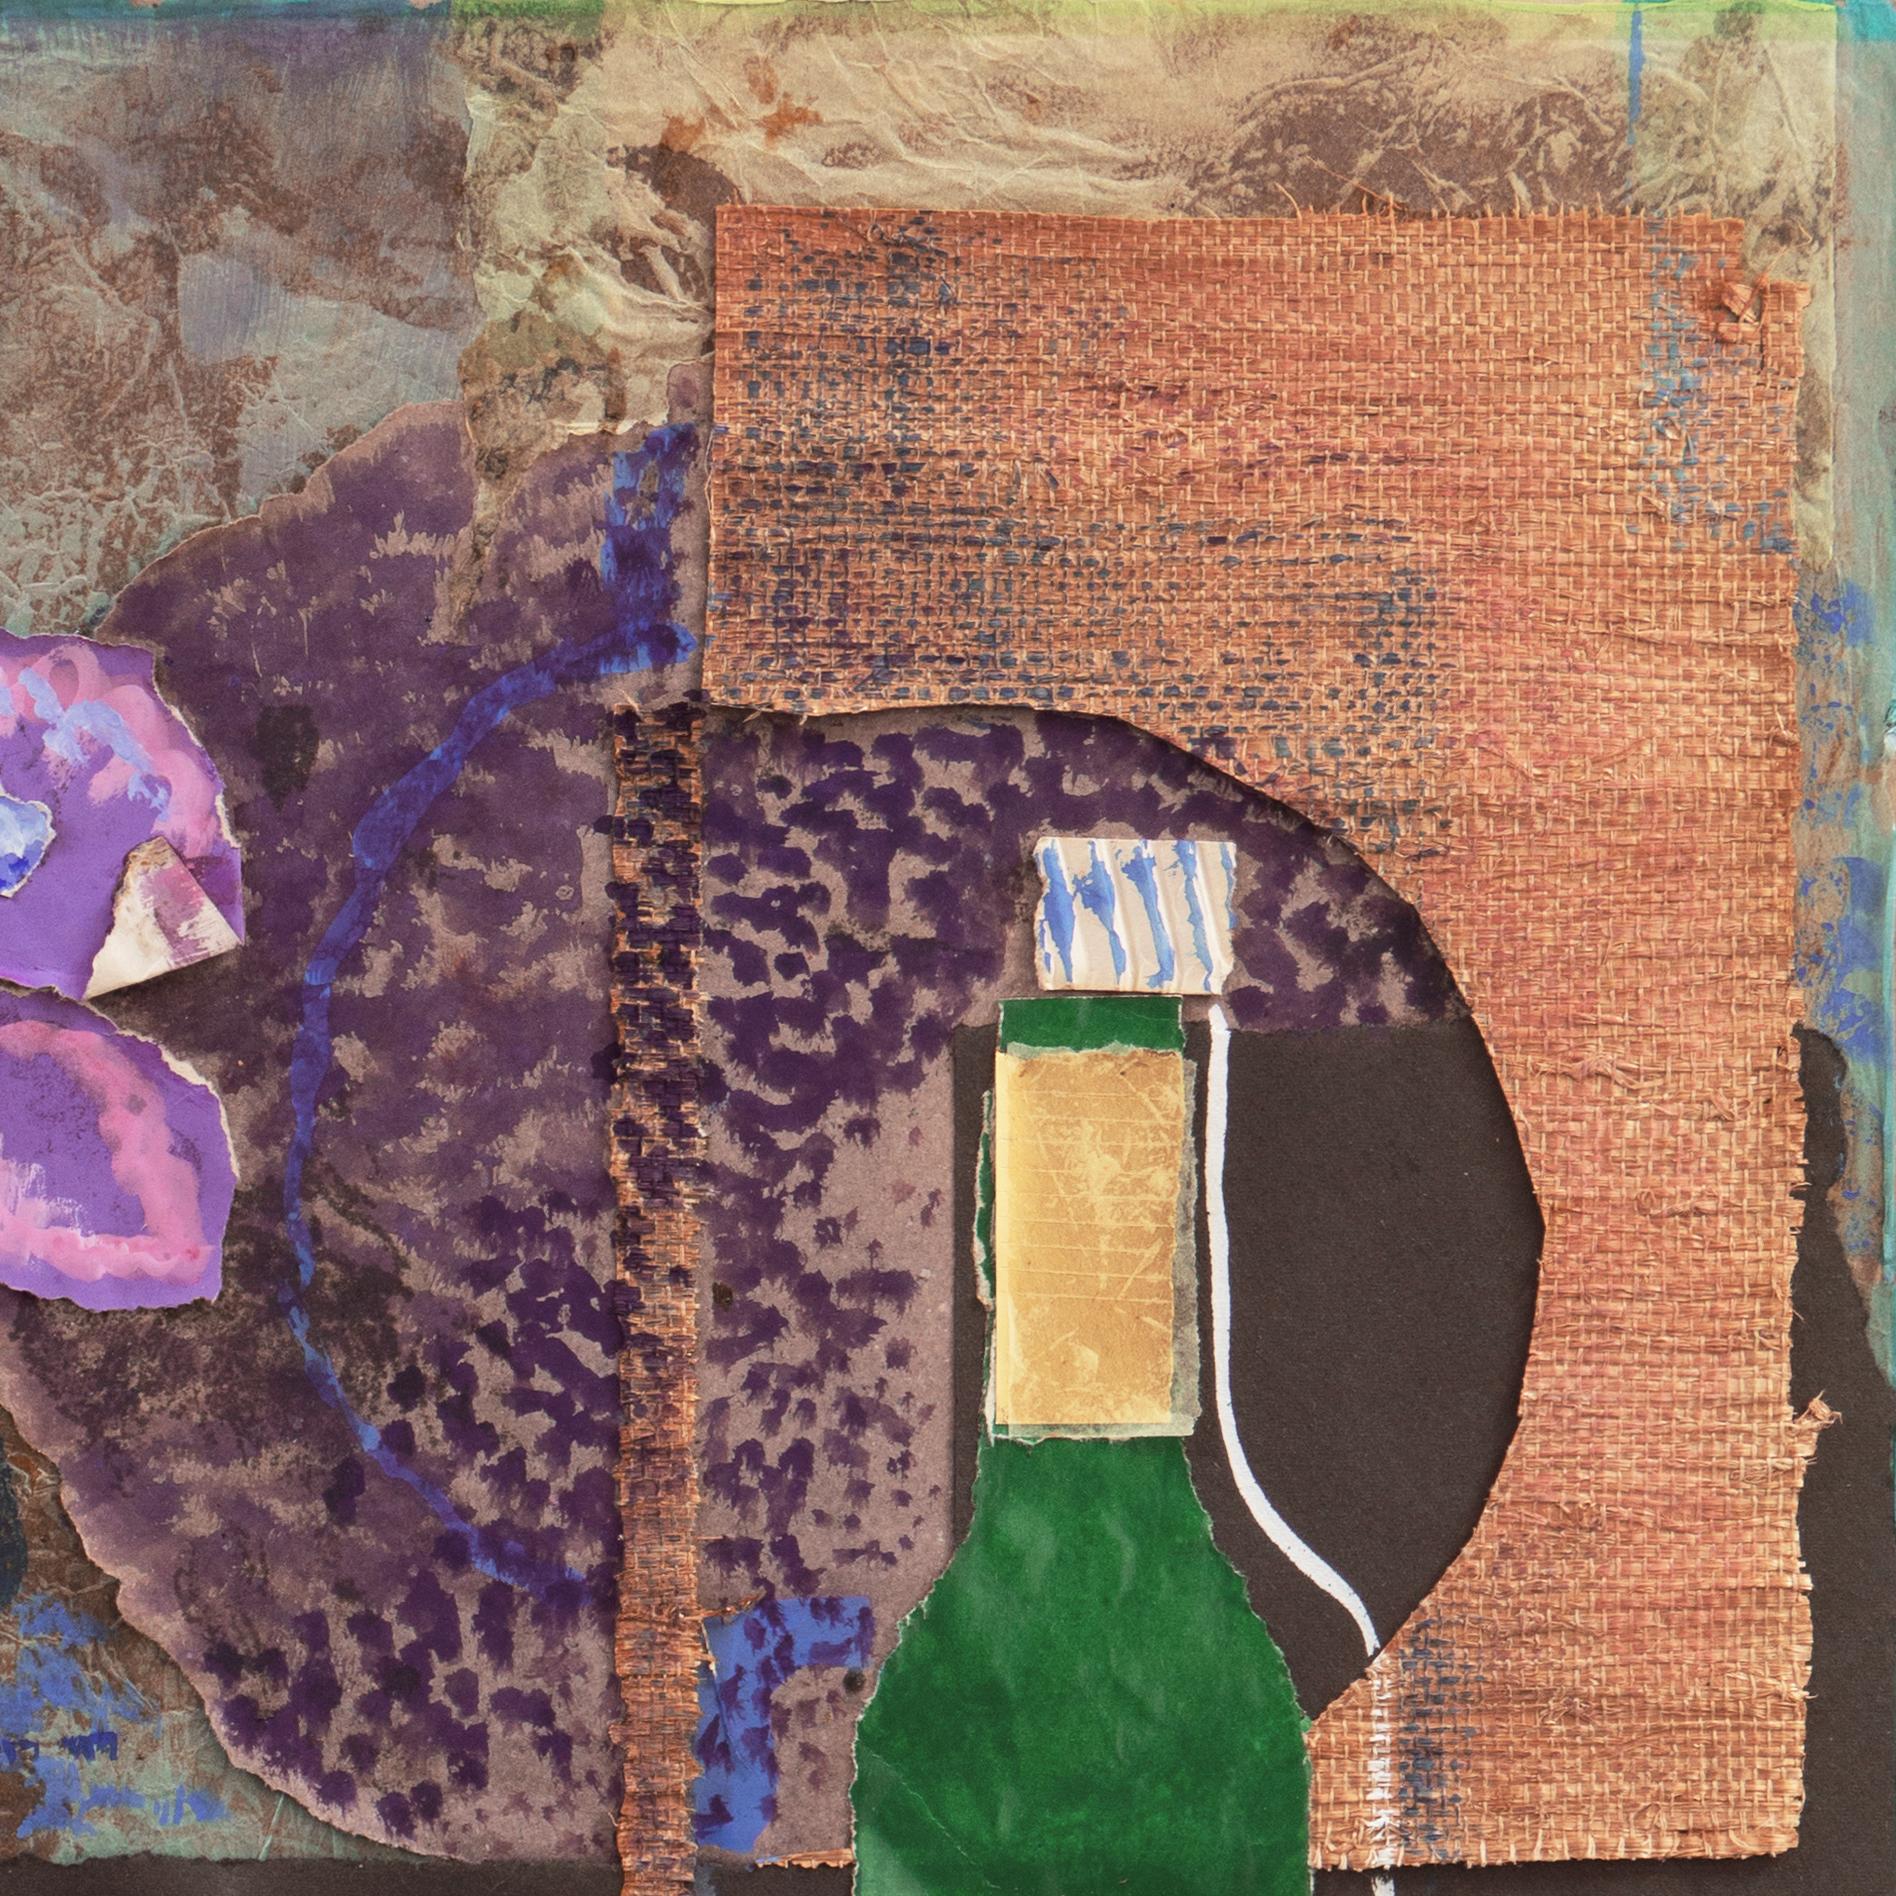 Signed lower right, 'Layton',  for Gray Layton (American, 20th century) and created circa 1965. 

An exuberant and brilliantly colored, Post Impressionist collaged still-life painting comprising a bouquet of lilac blossoms, shown informally arranged